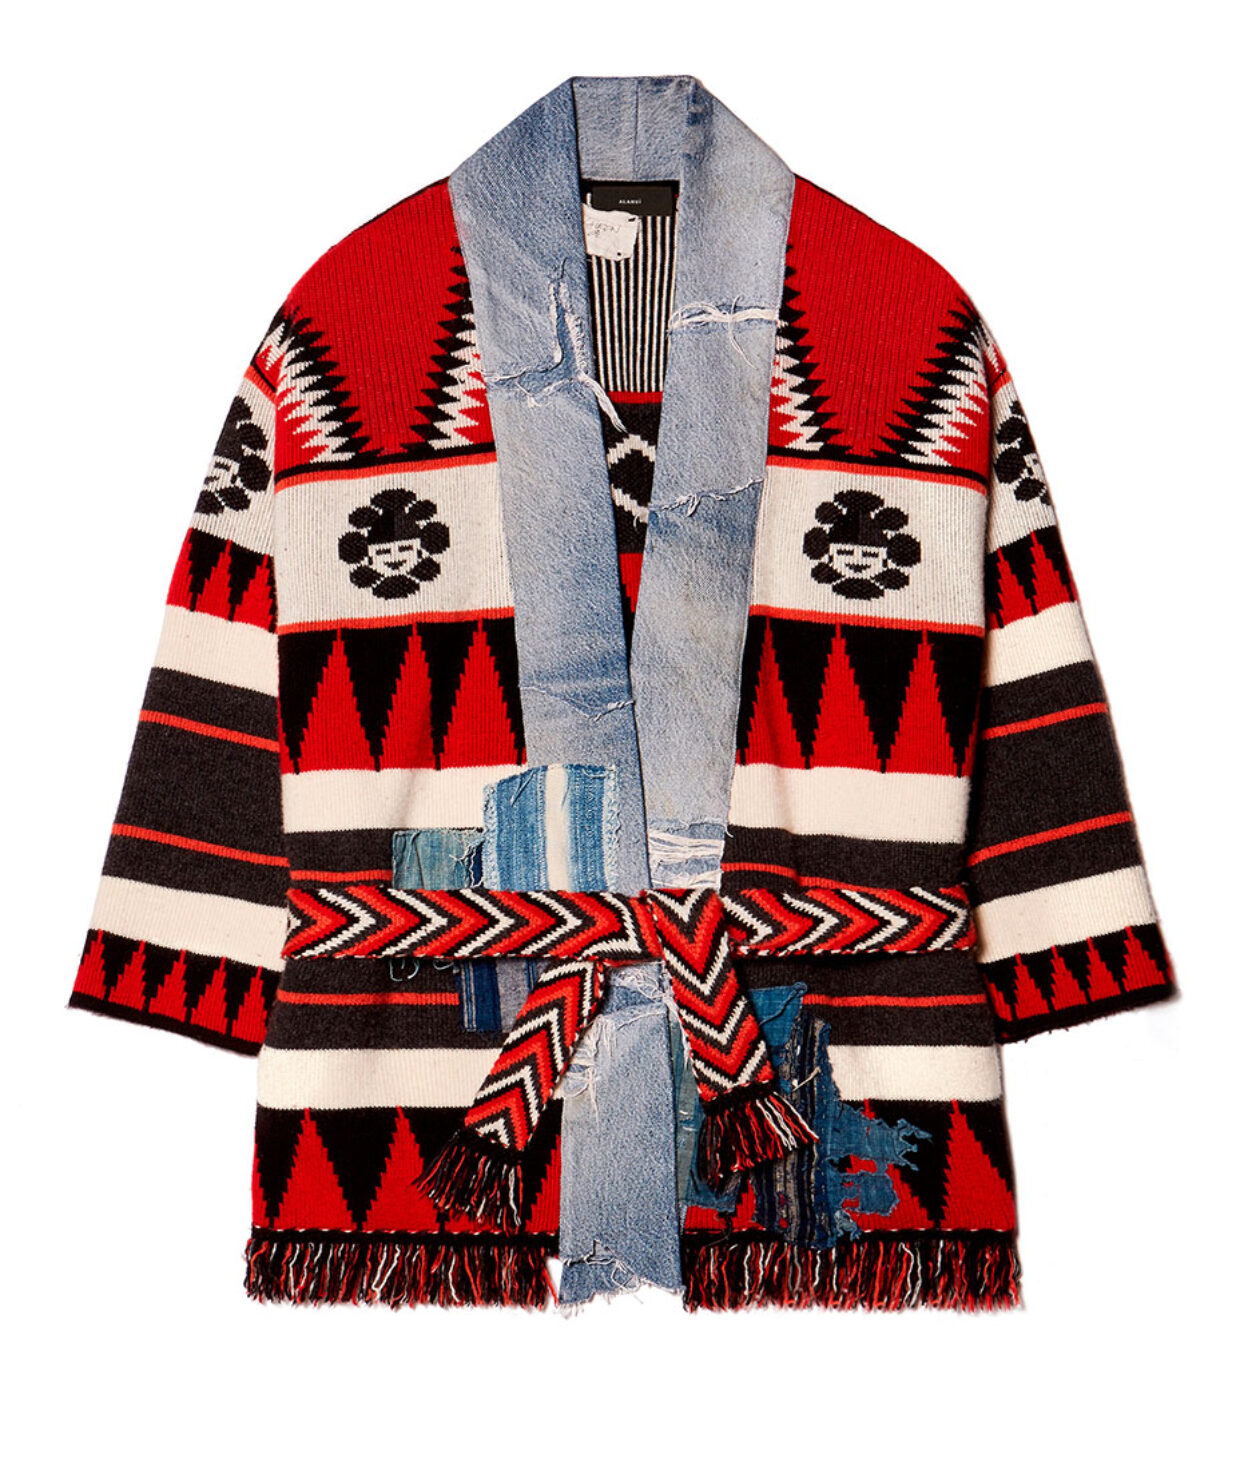 L.A. Designer Greg Lauren Has Cozy New Knitwear Collab With Americana Vibe | 2